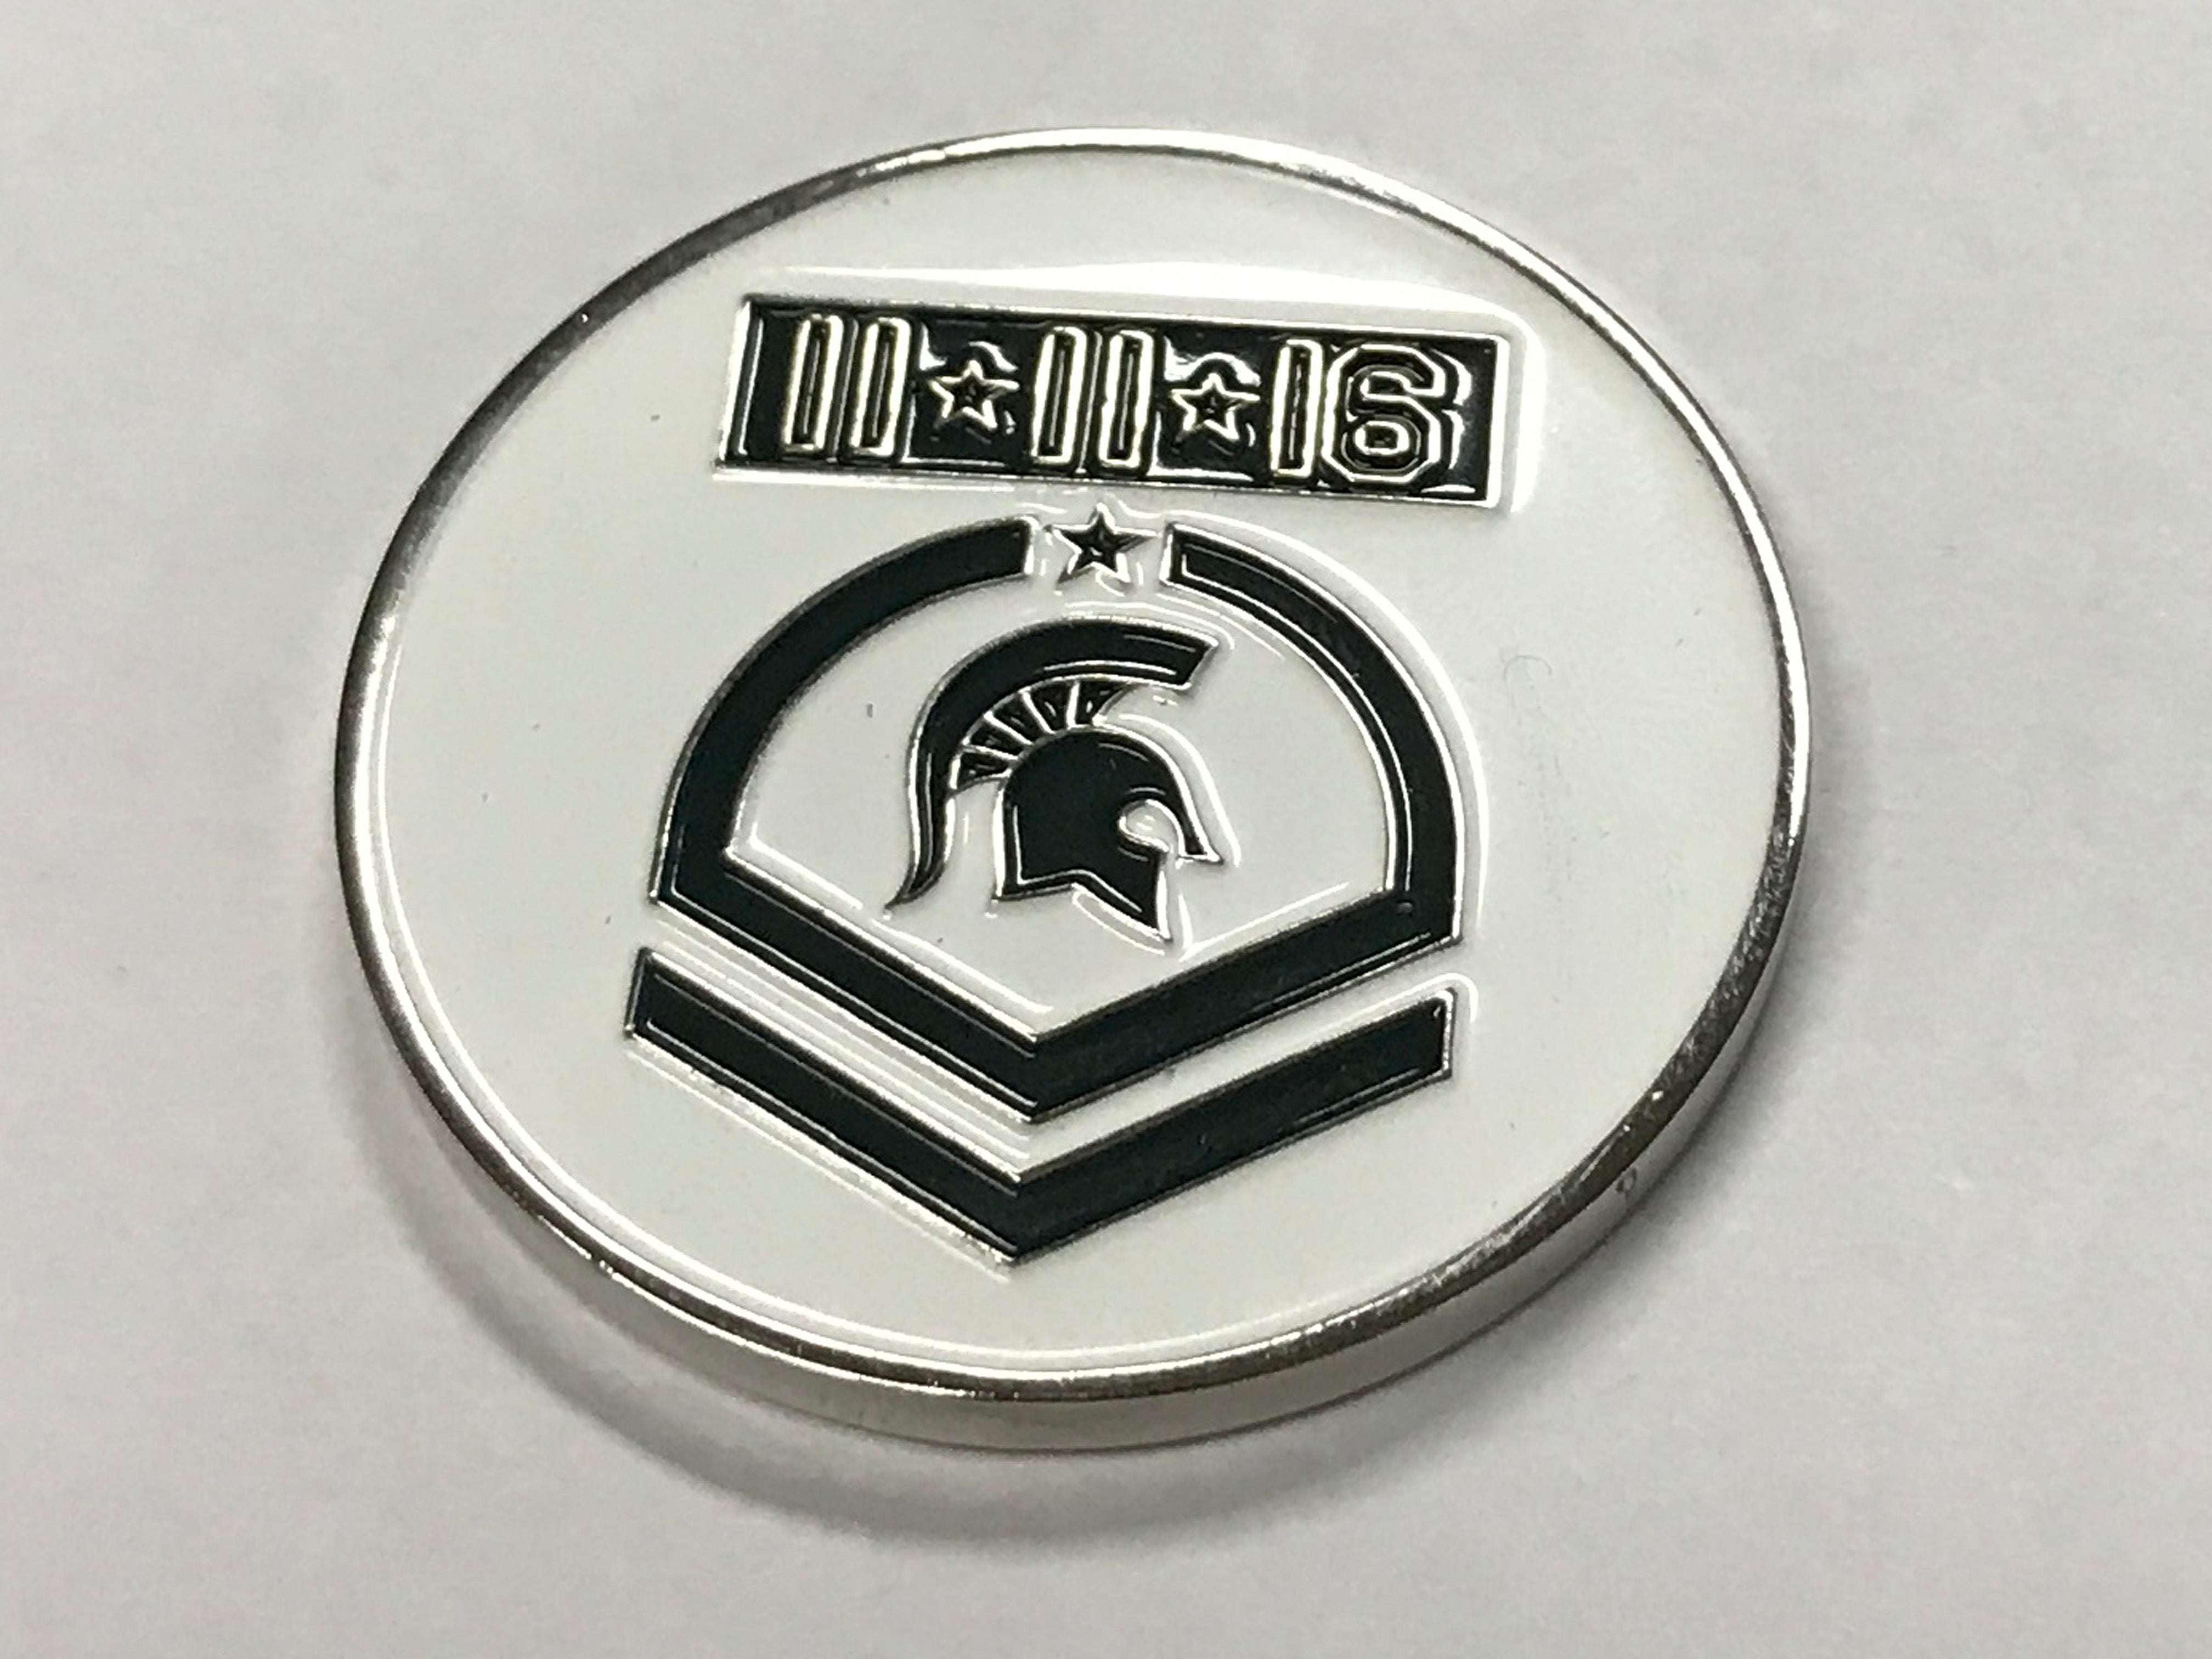 2016 Armed Forces Classic MSU Challenge Coin